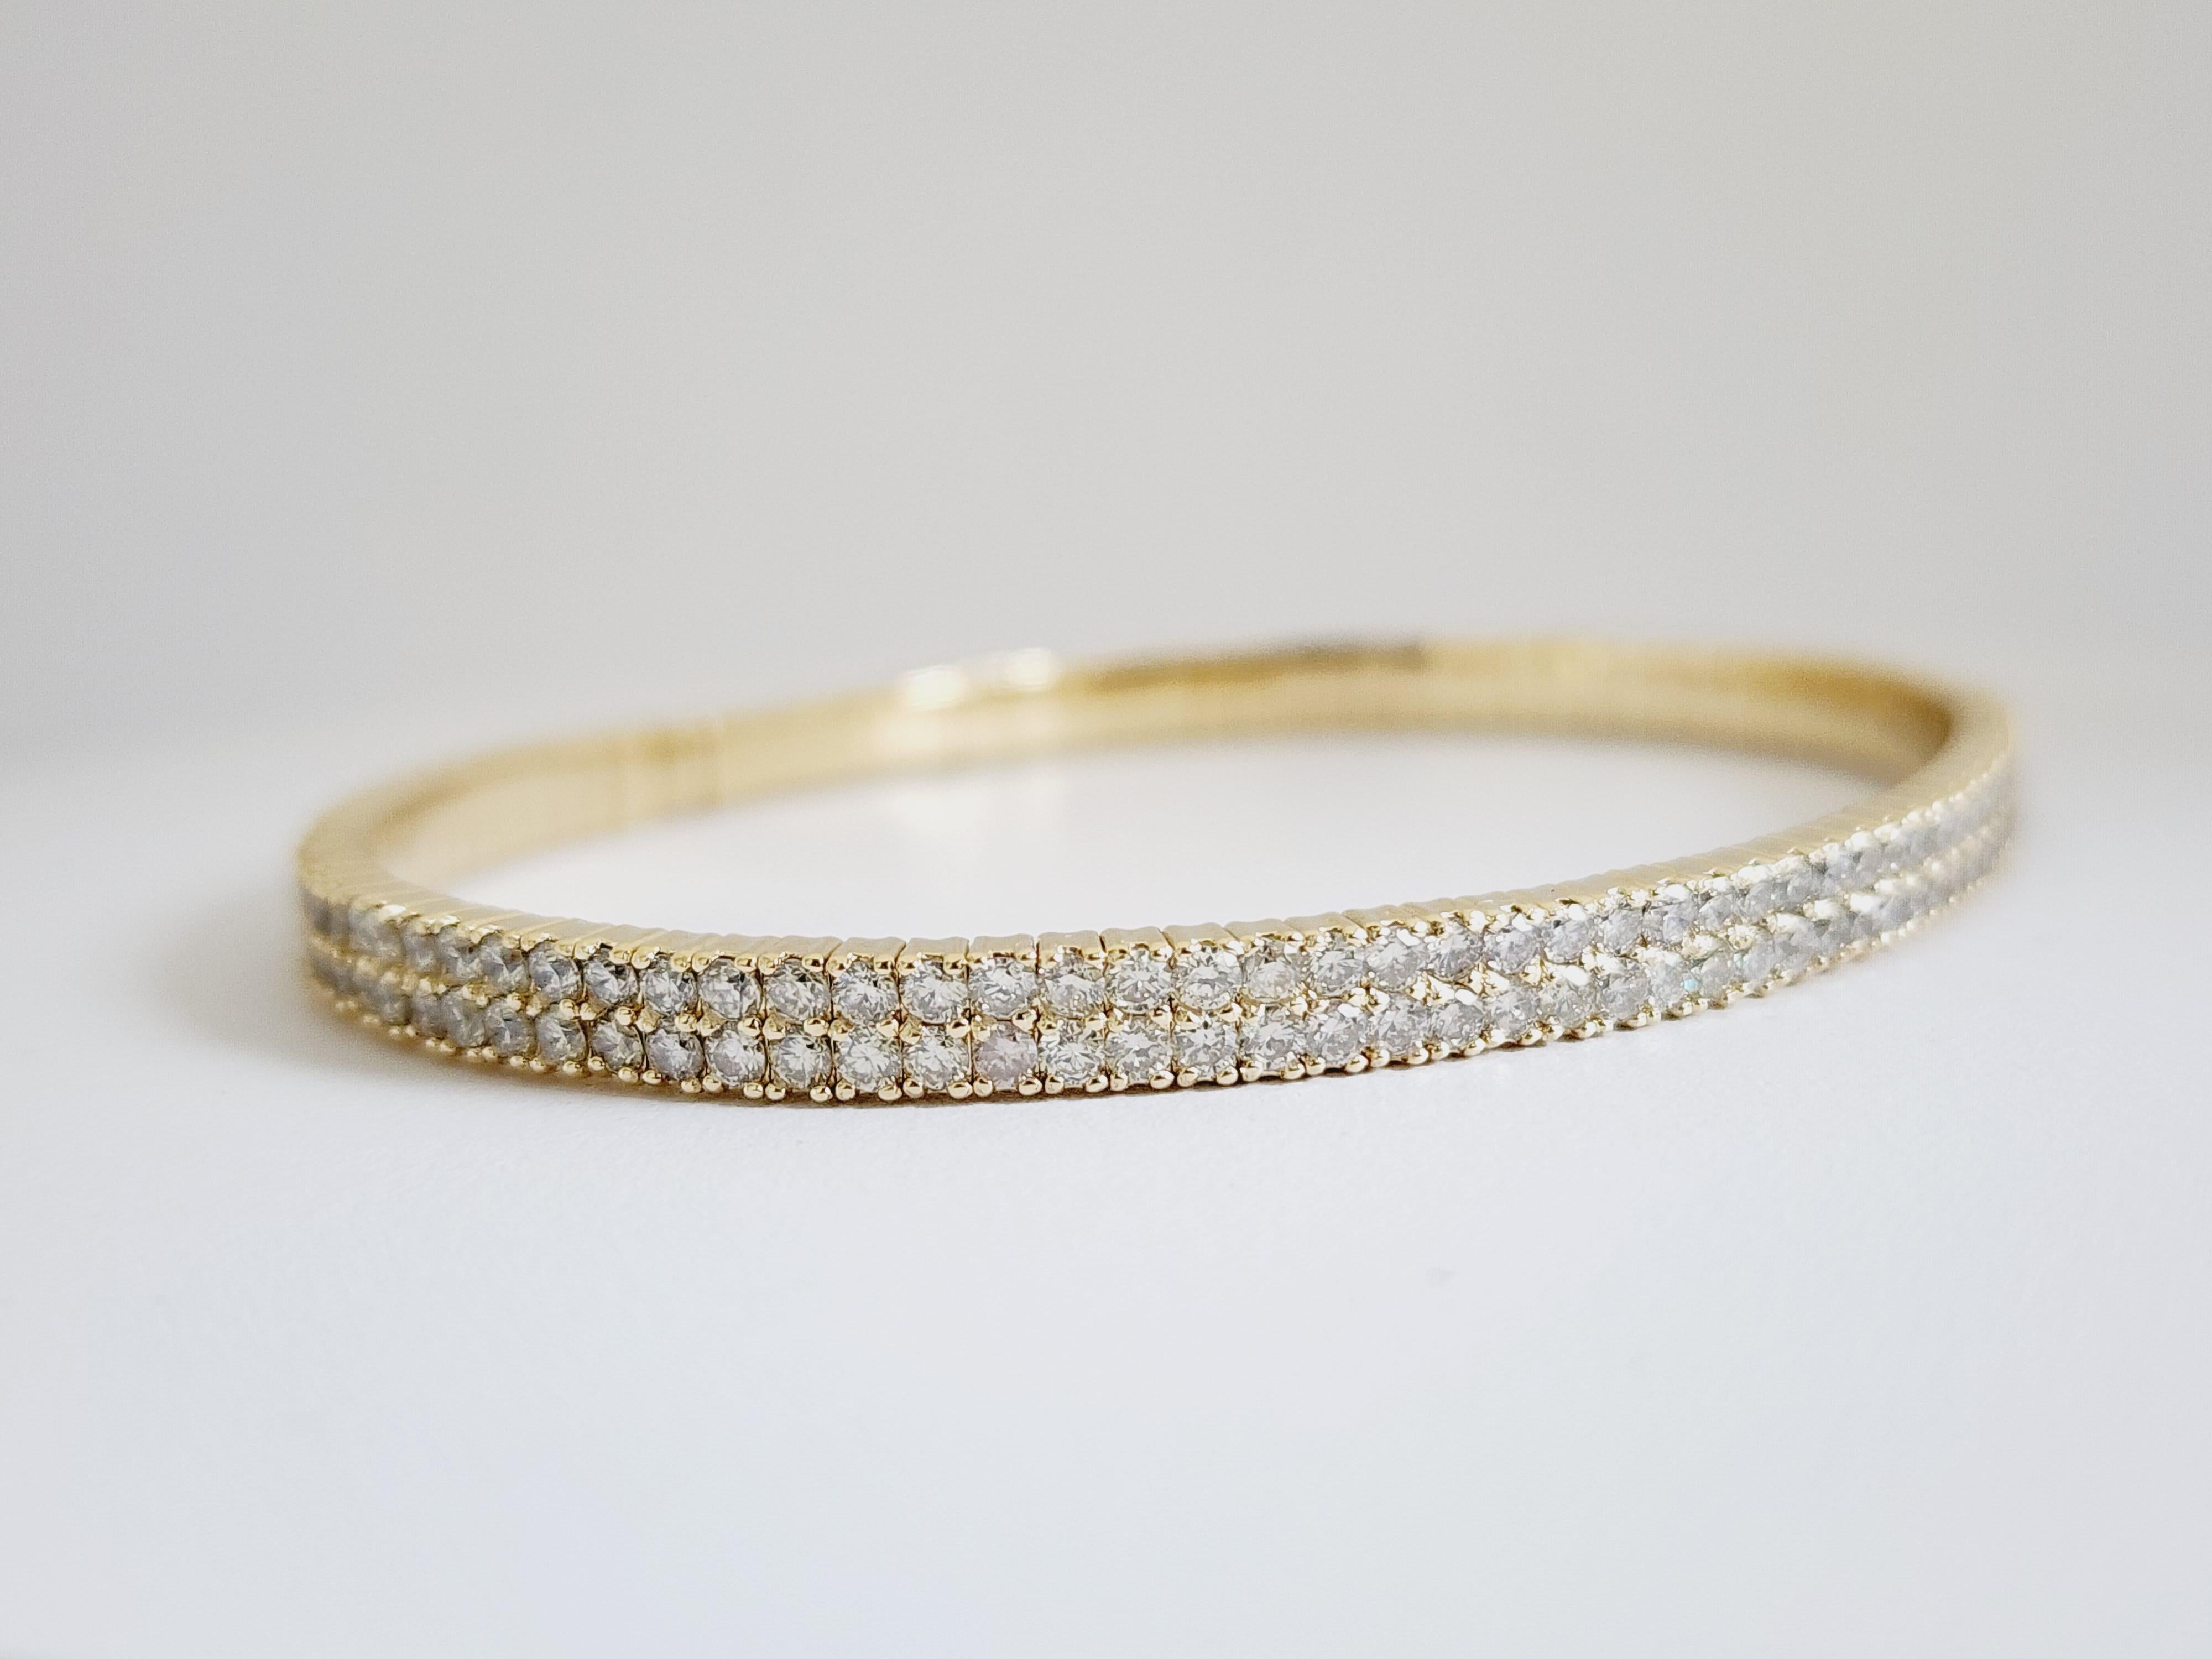 Natural Diamonds 4.77 ctw Flexible double row bangle yellow gold 14k 7 Inch. Color H, Clarity SI. 4 mm.

*Free shipping within the U.S.*